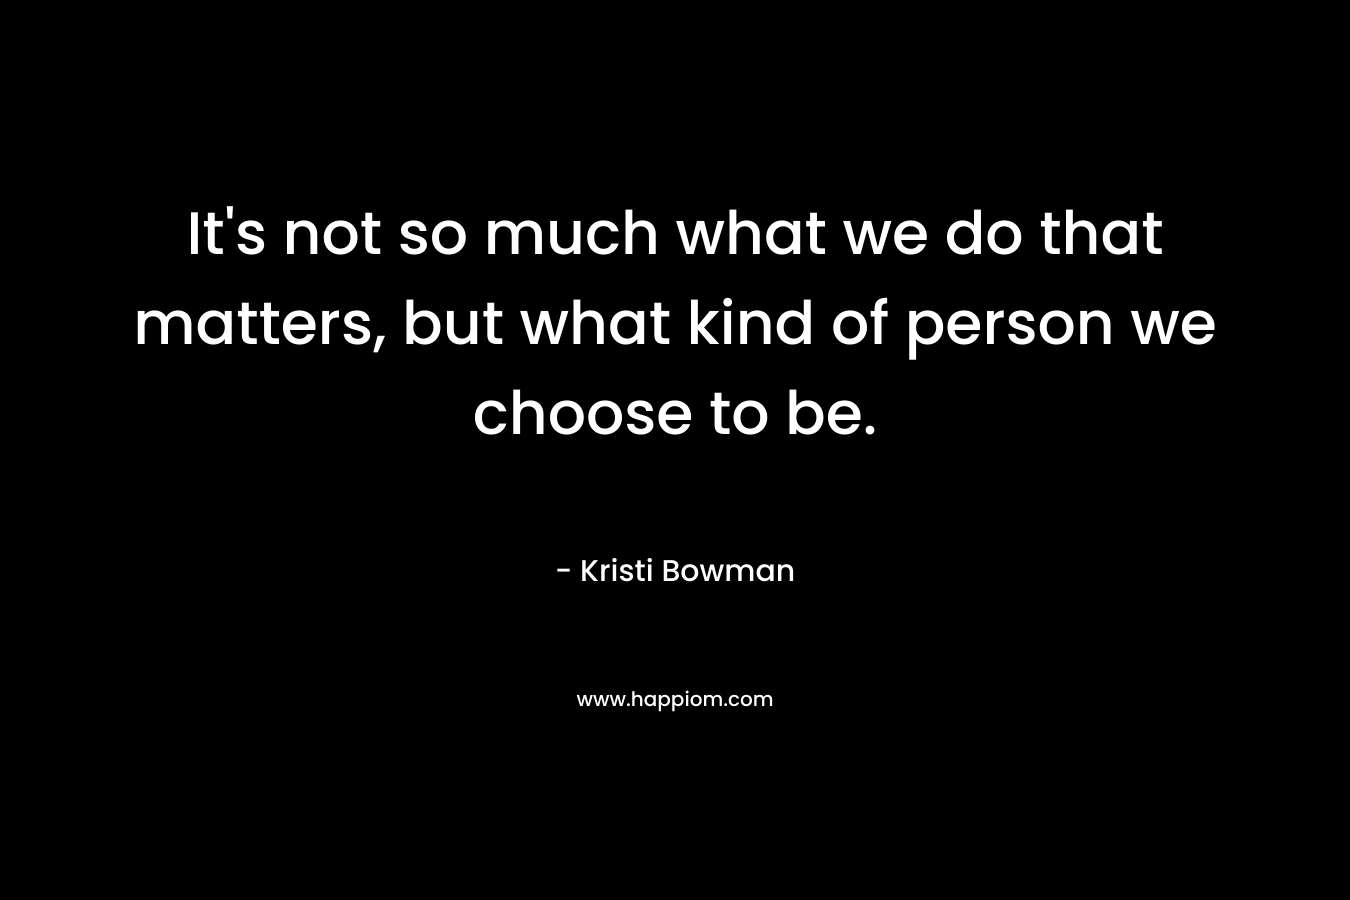 It's not so much what we do that matters, but what kind of person we choose to be.